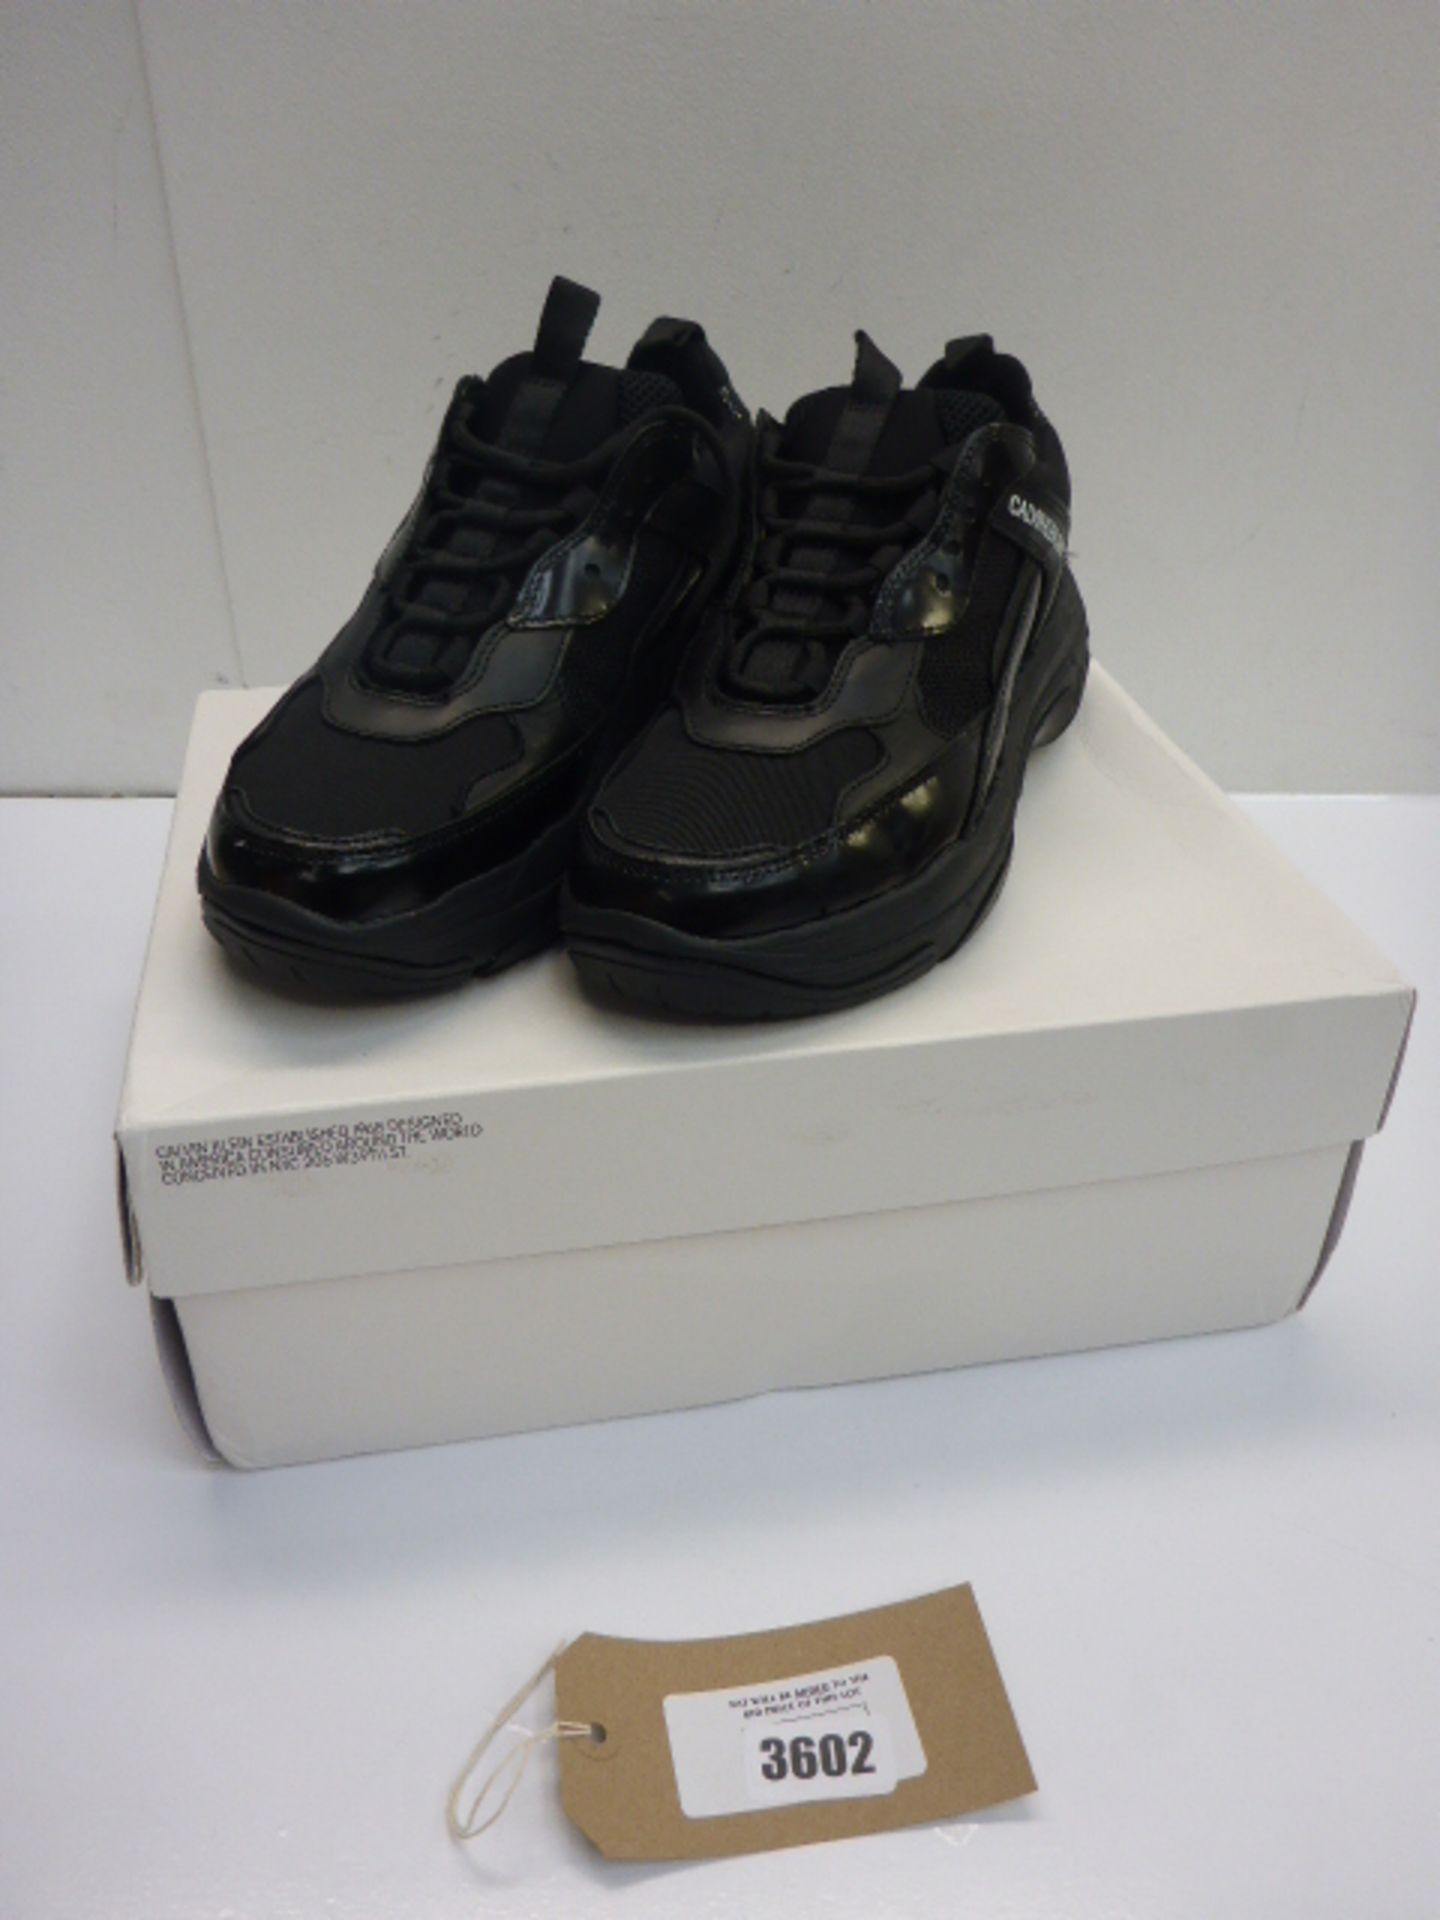 A pair of Calvin Klein Jeans in patent black/leather trainers UK 9